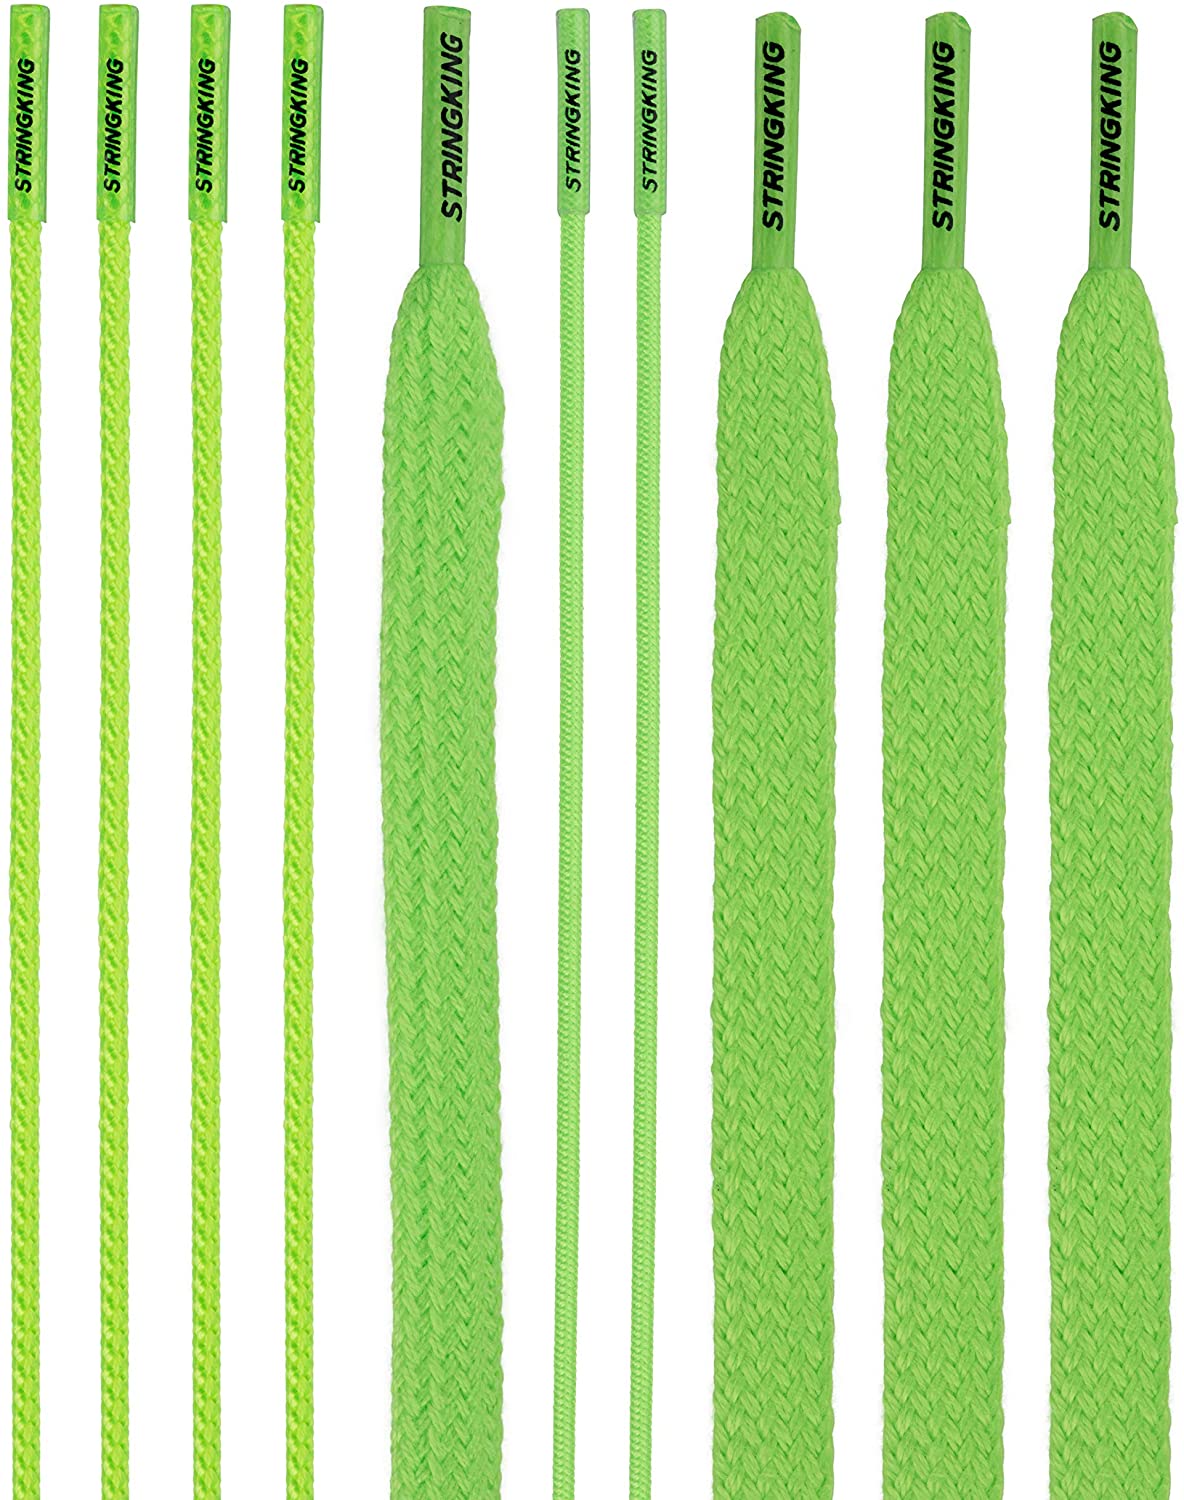 StringKing Stringing Supplies OS / Lime StringKing Performance Lacrosse String Kit from Lacrosse Fanatic